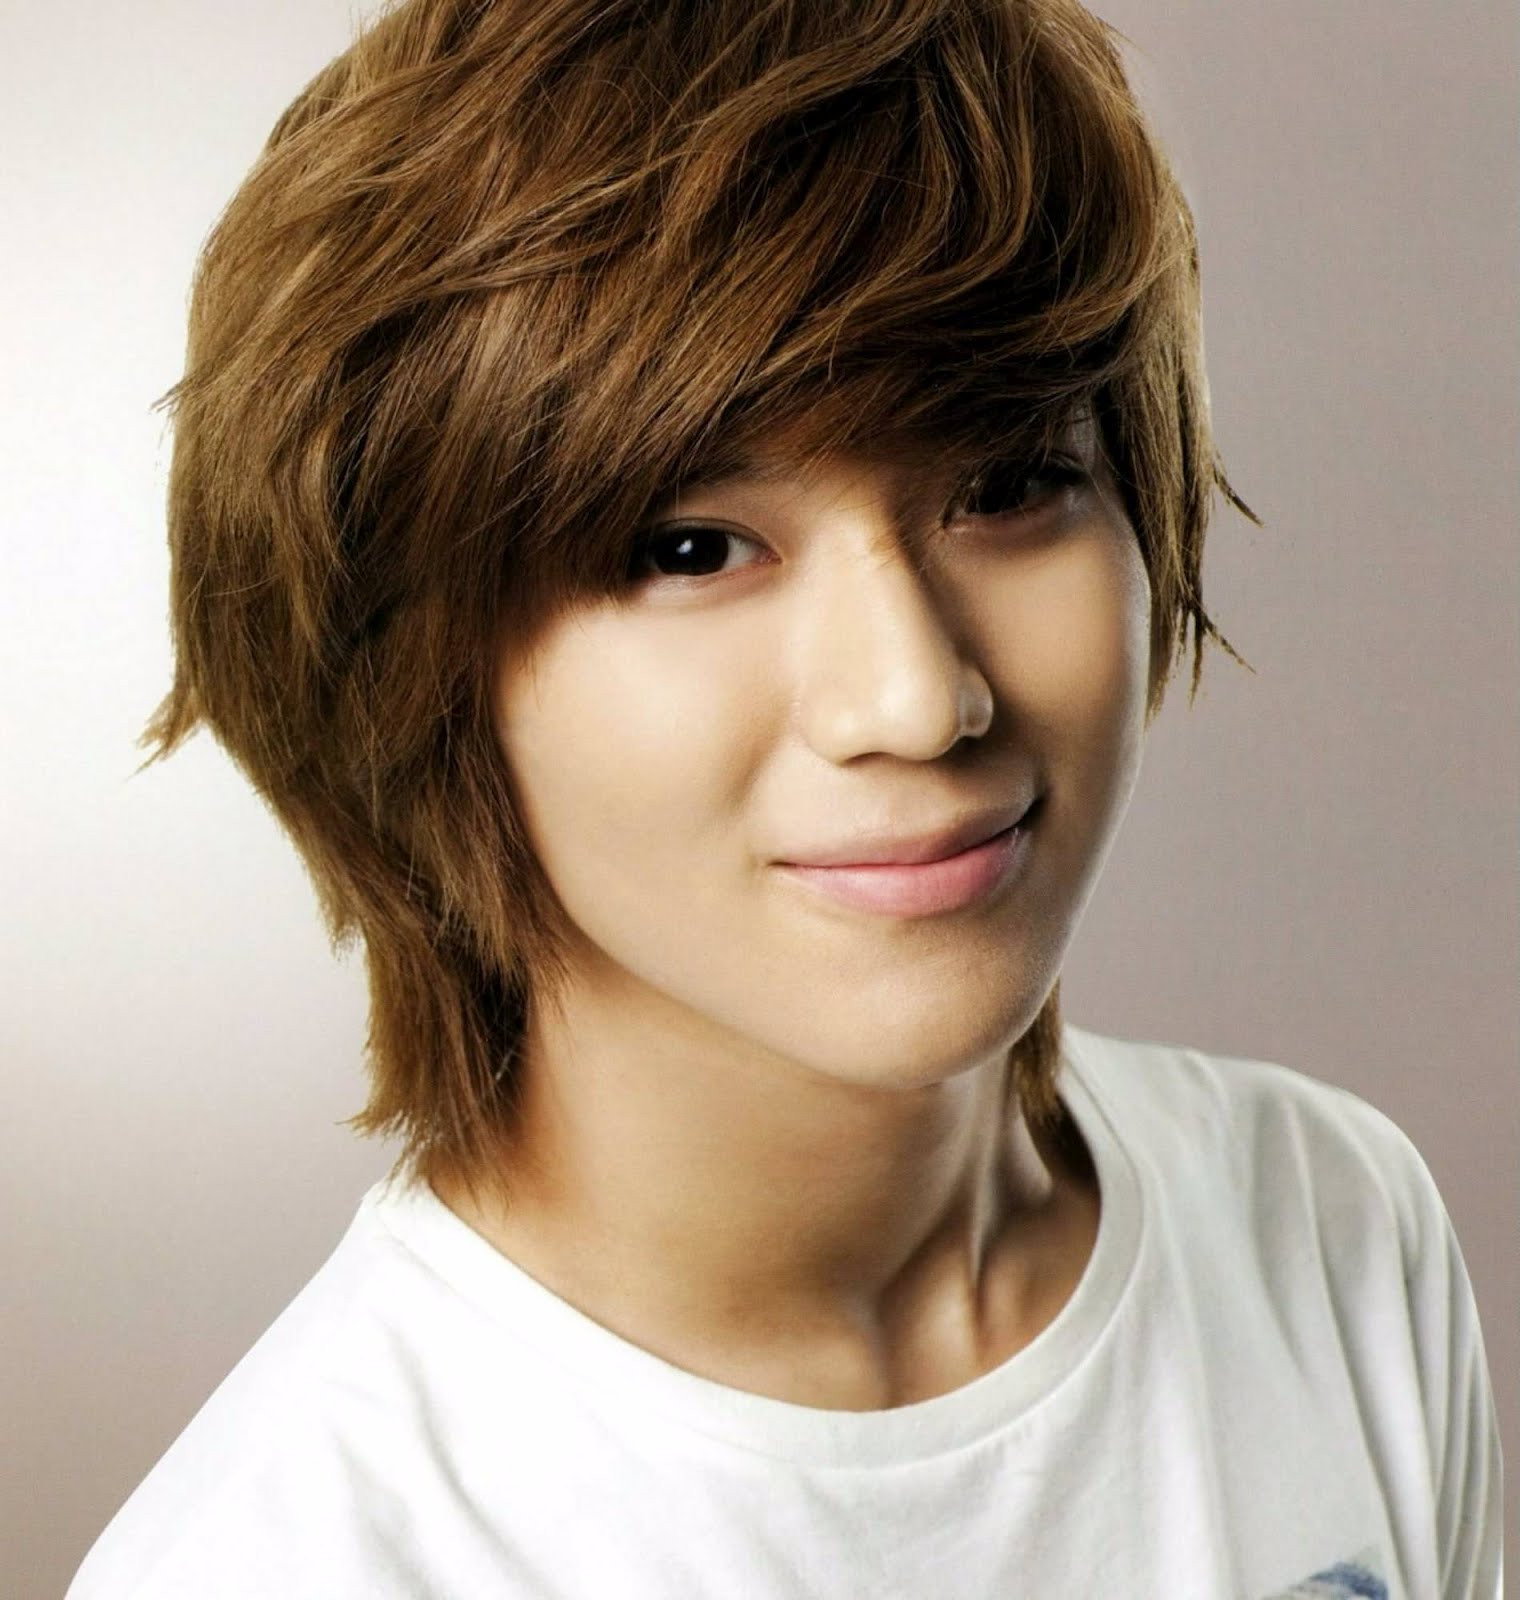 Kpop Male Hairstyles
 Latest Korean Hairstyles for Men 2013